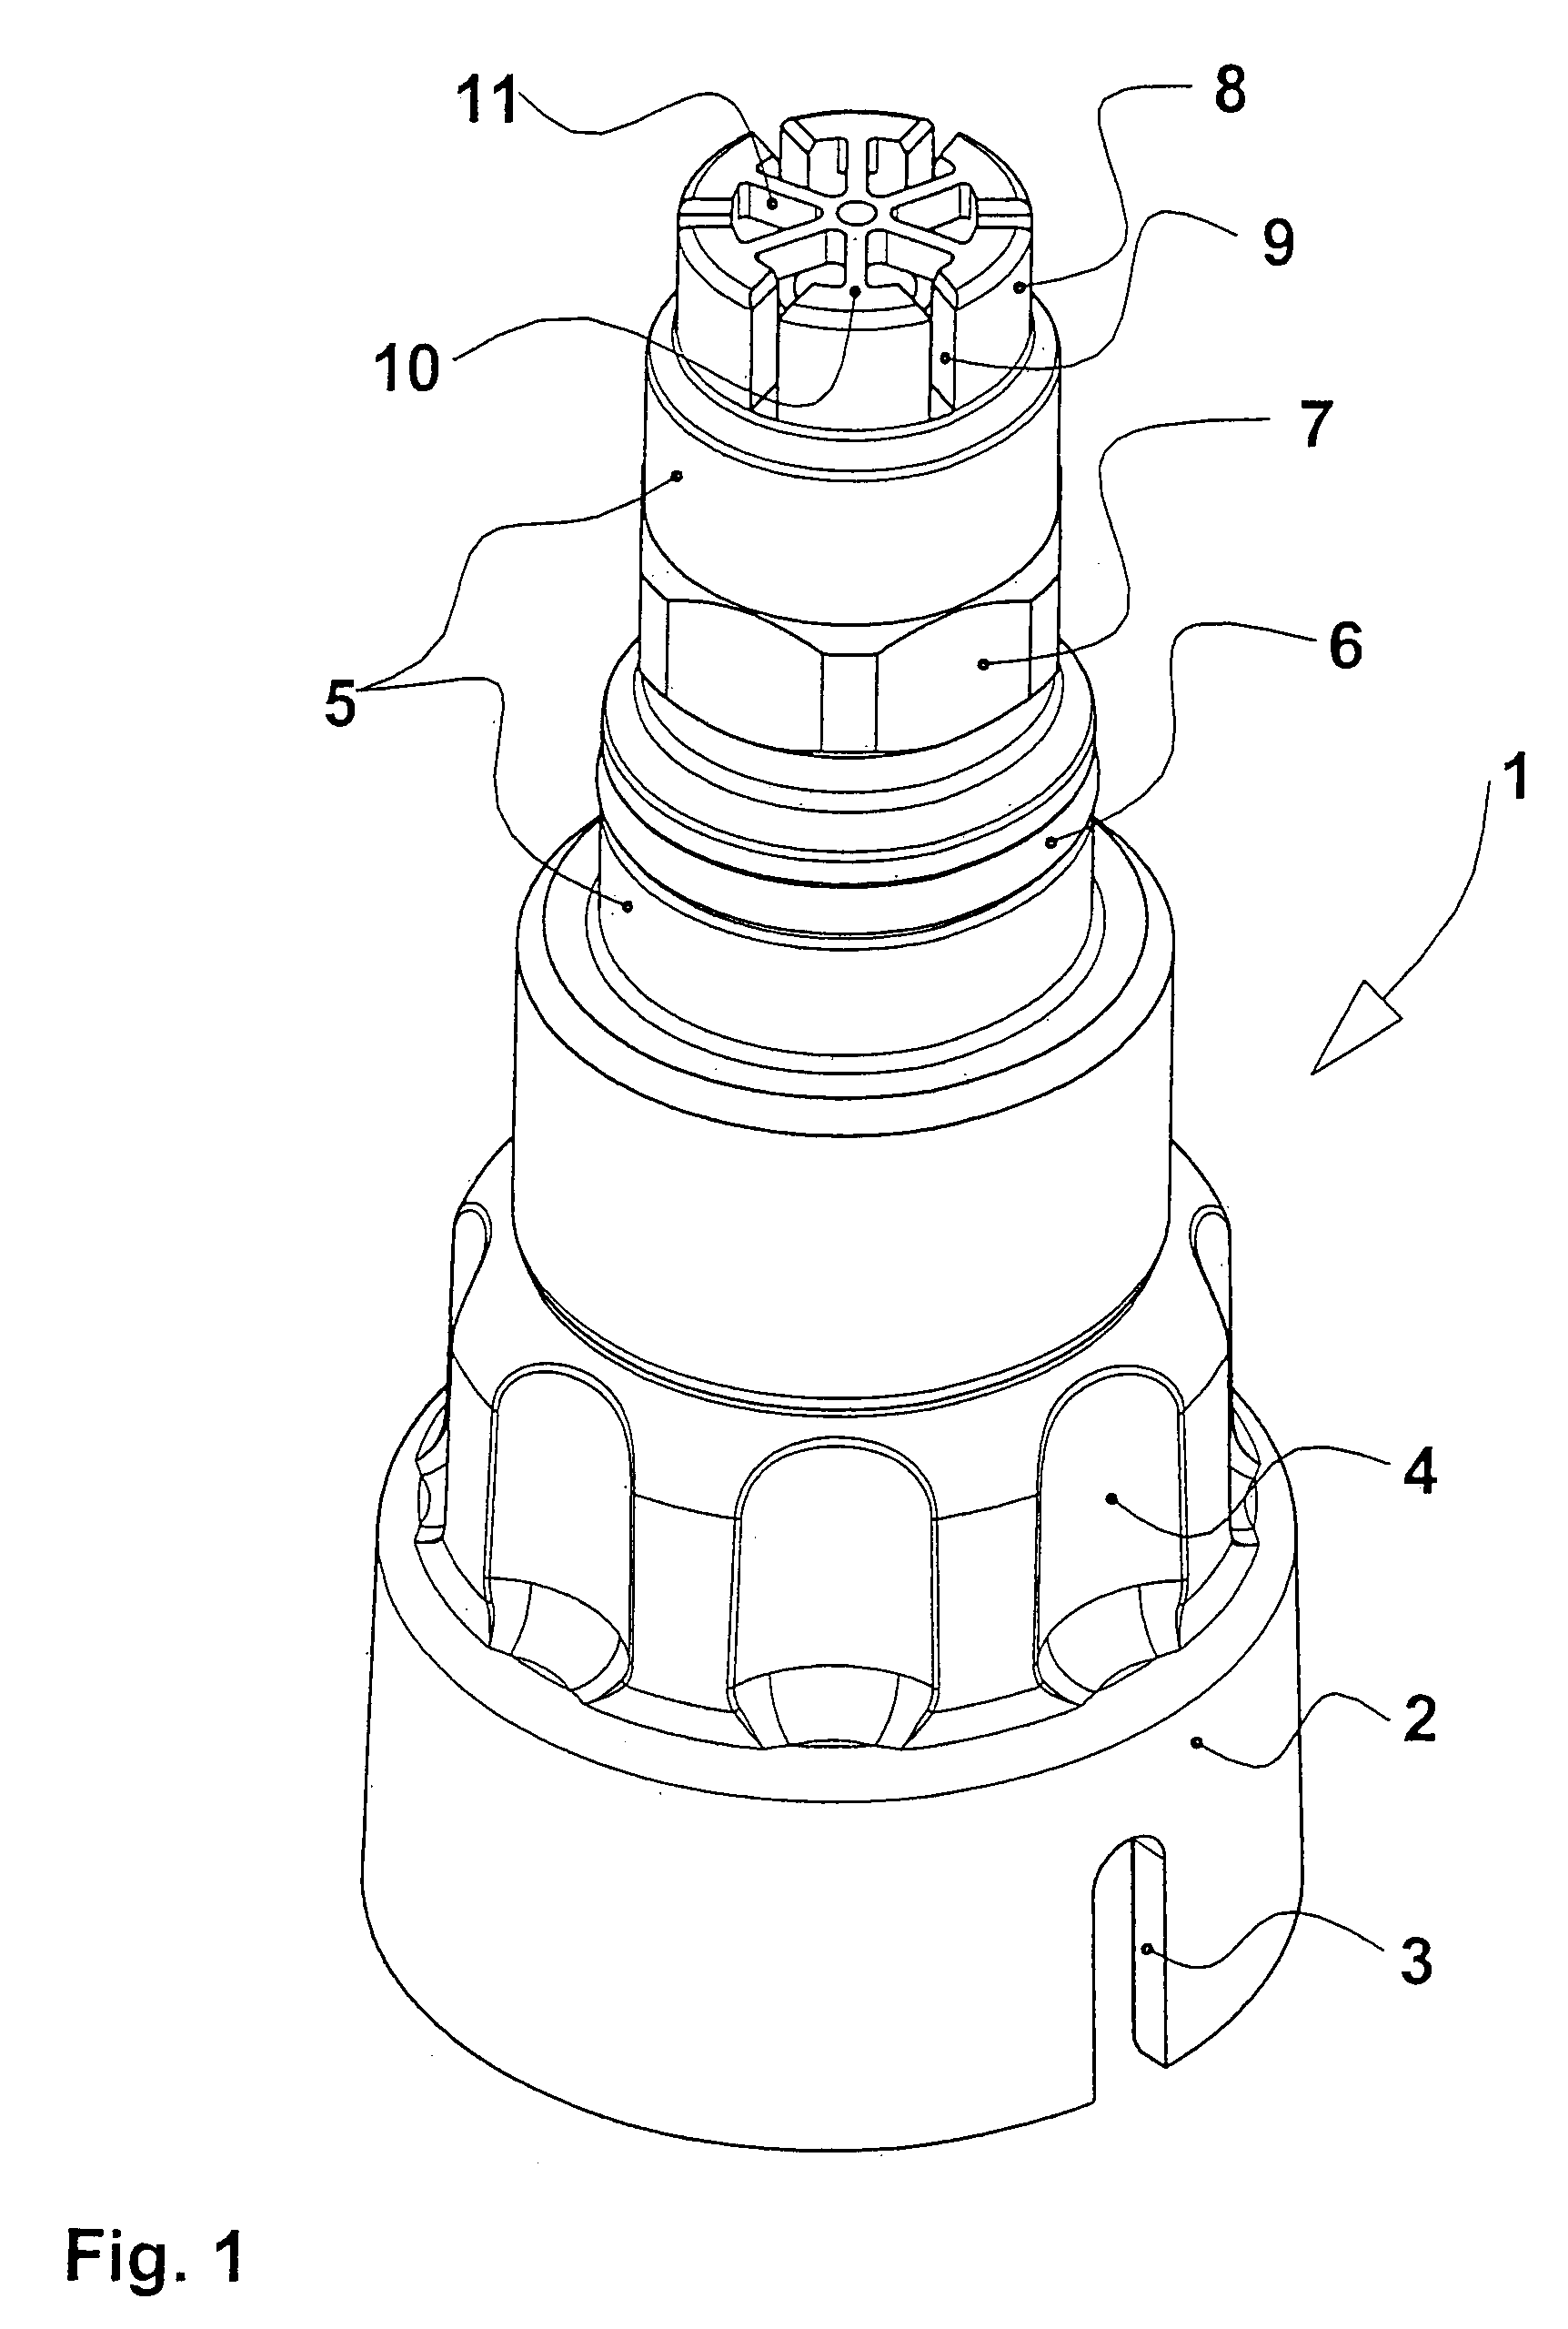 Filling system for an anesthetic evaporator